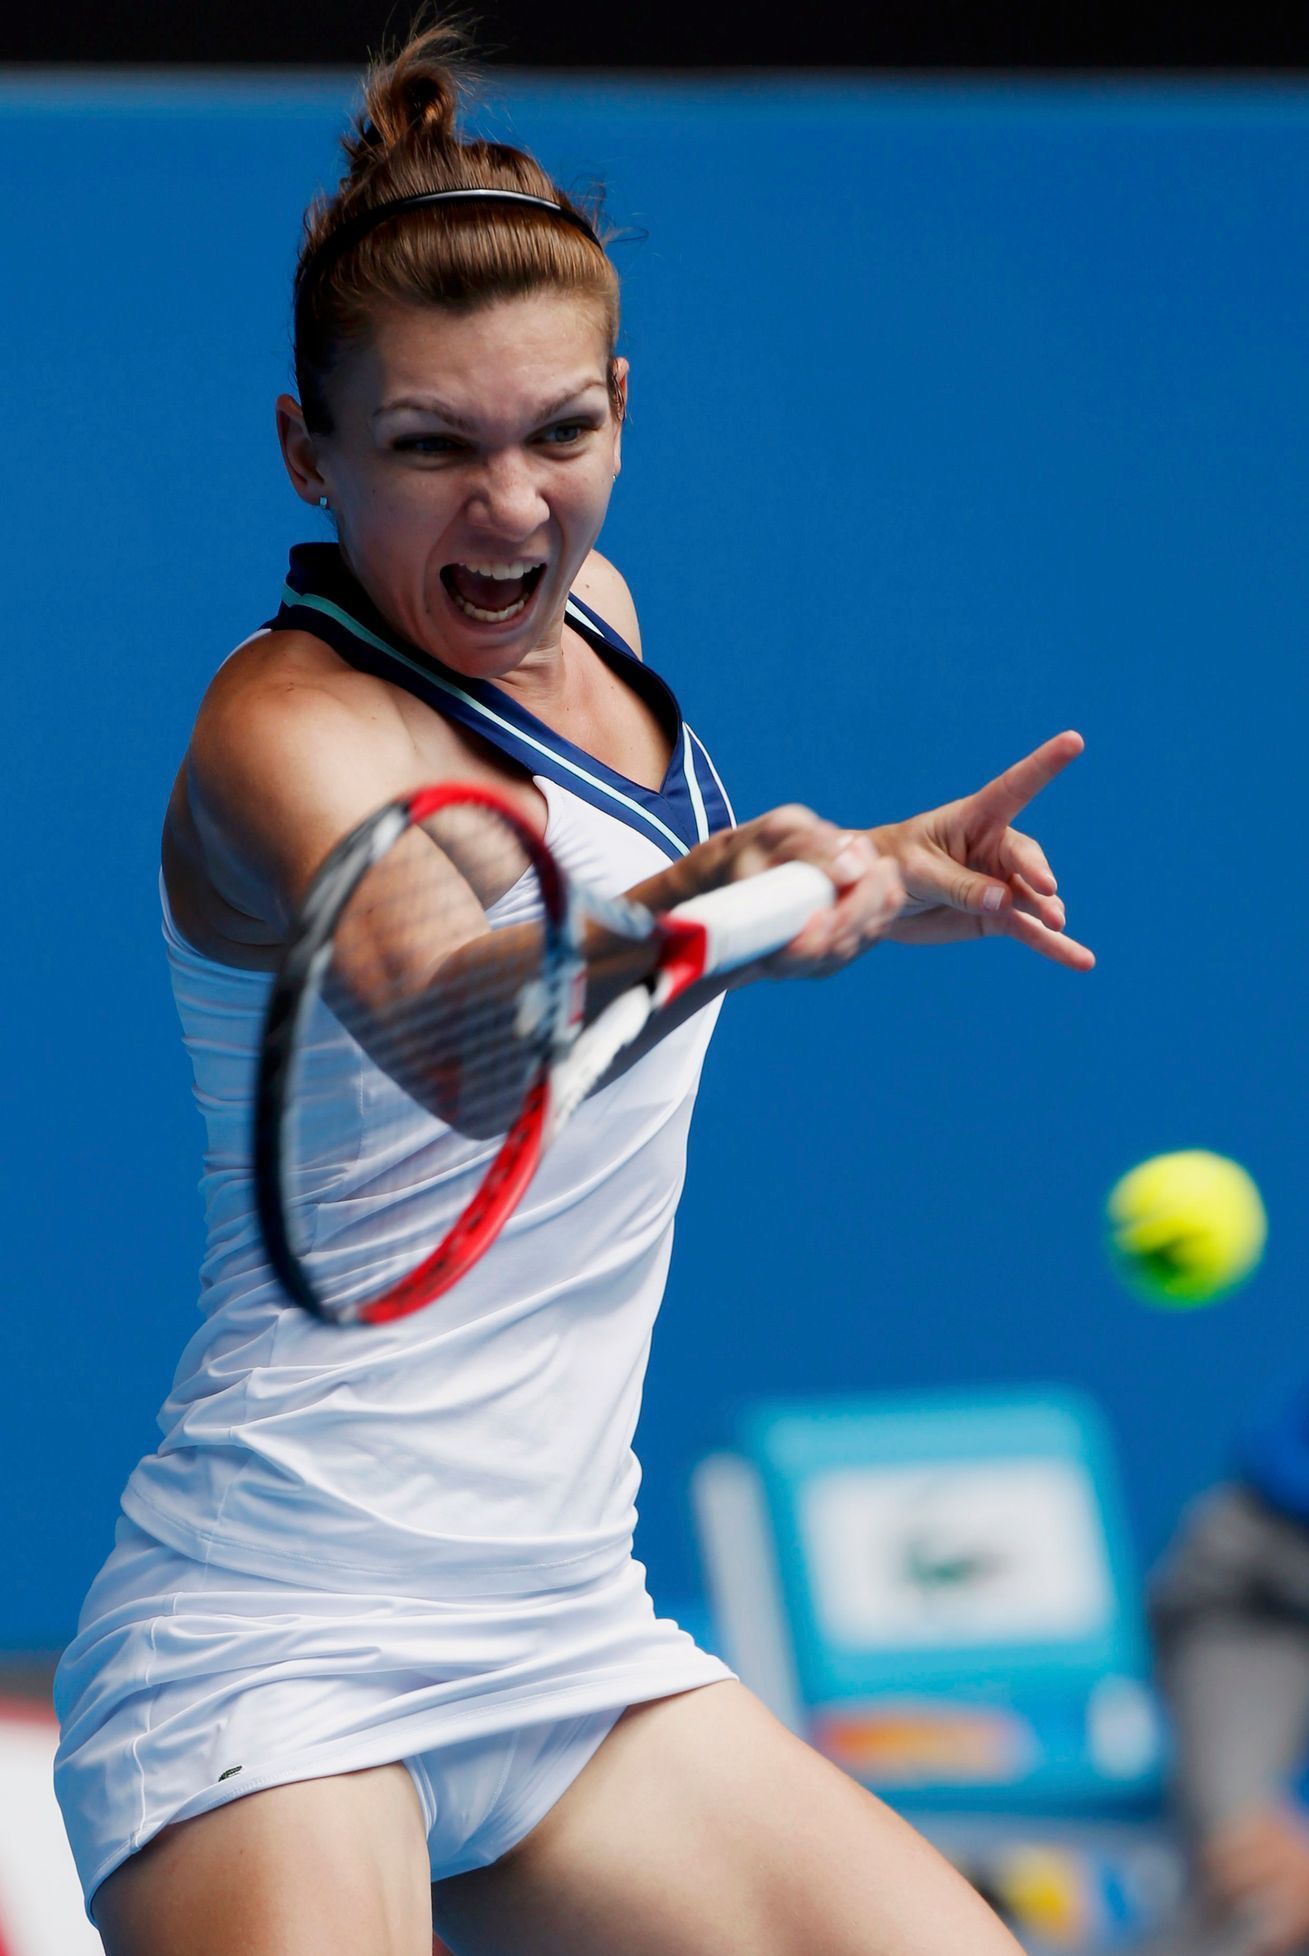 Simona Halep of Romania hits a return to Jelena Jankovic of Serbia during their women's singles match at the Australian Open 2014 tennis tournament in Melbourne